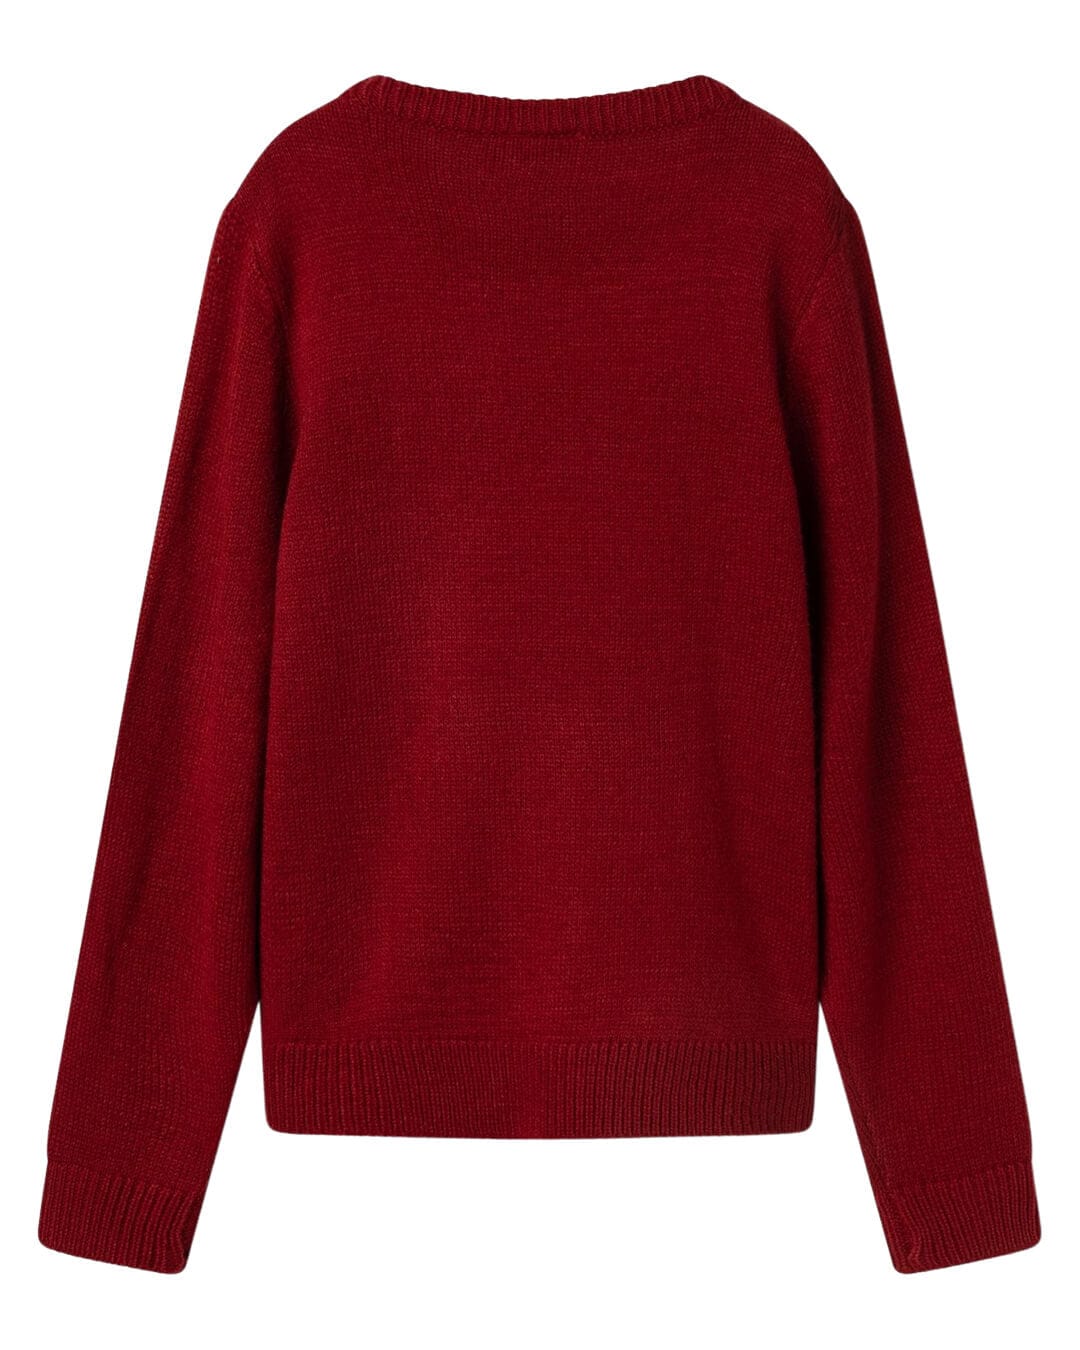 Name It Jumpers Name It Christmas Skiing Snowman Red Jumper